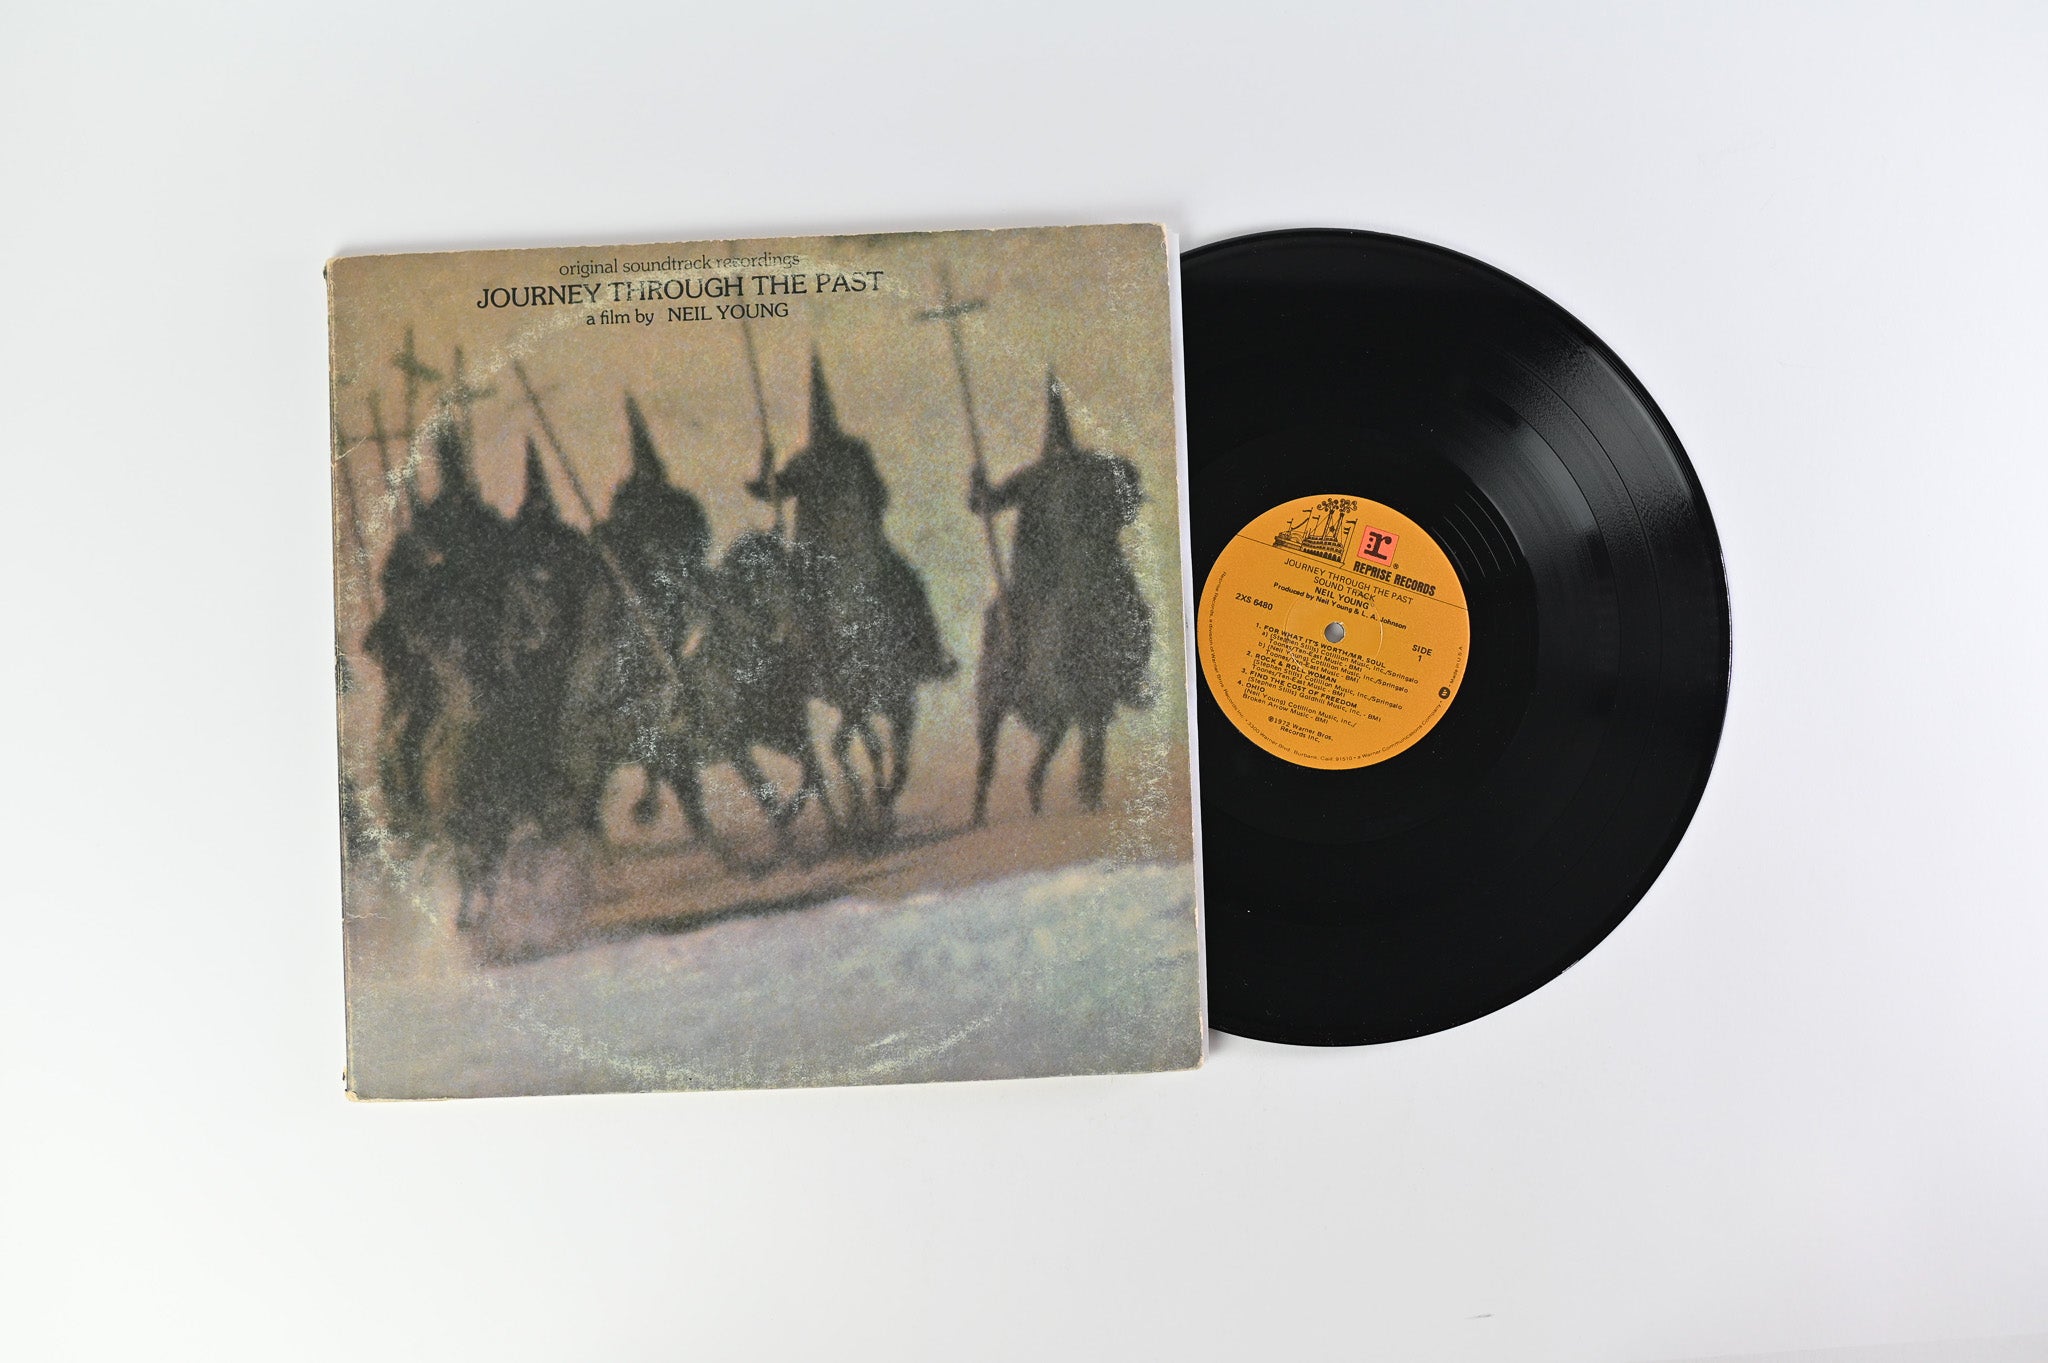 Neil Young - Journey Through The Past on Reprise Records